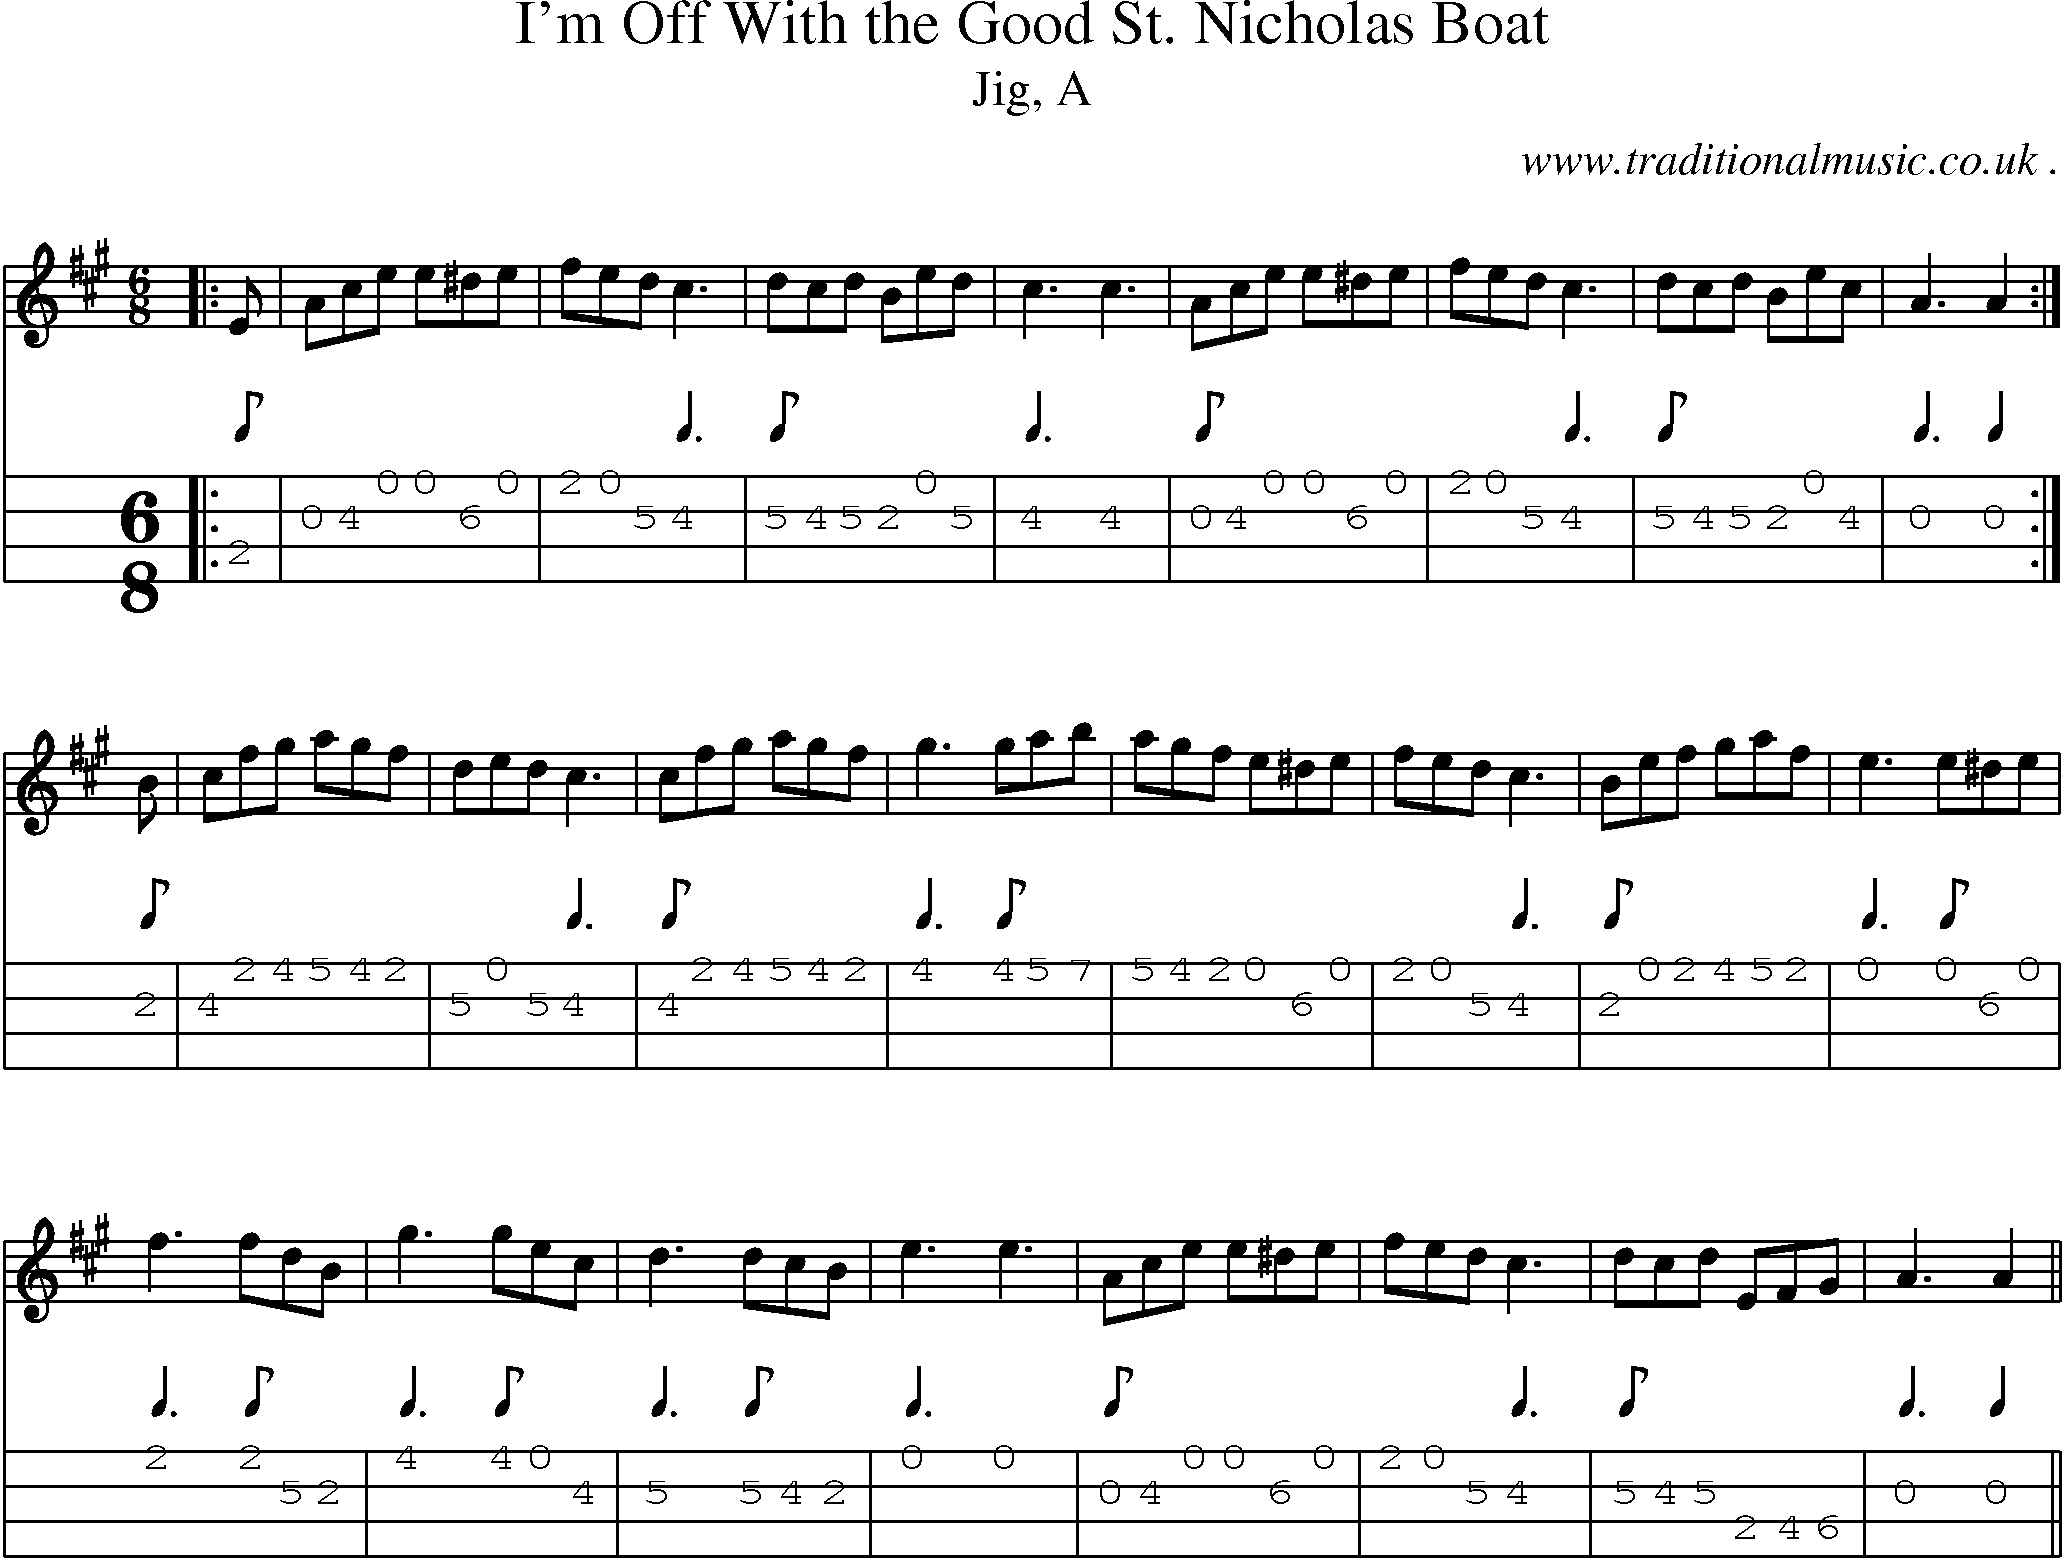 Sheet-music  score, Chords and Mandolin Tabs for Im Off With The Good St Nicholas Boat